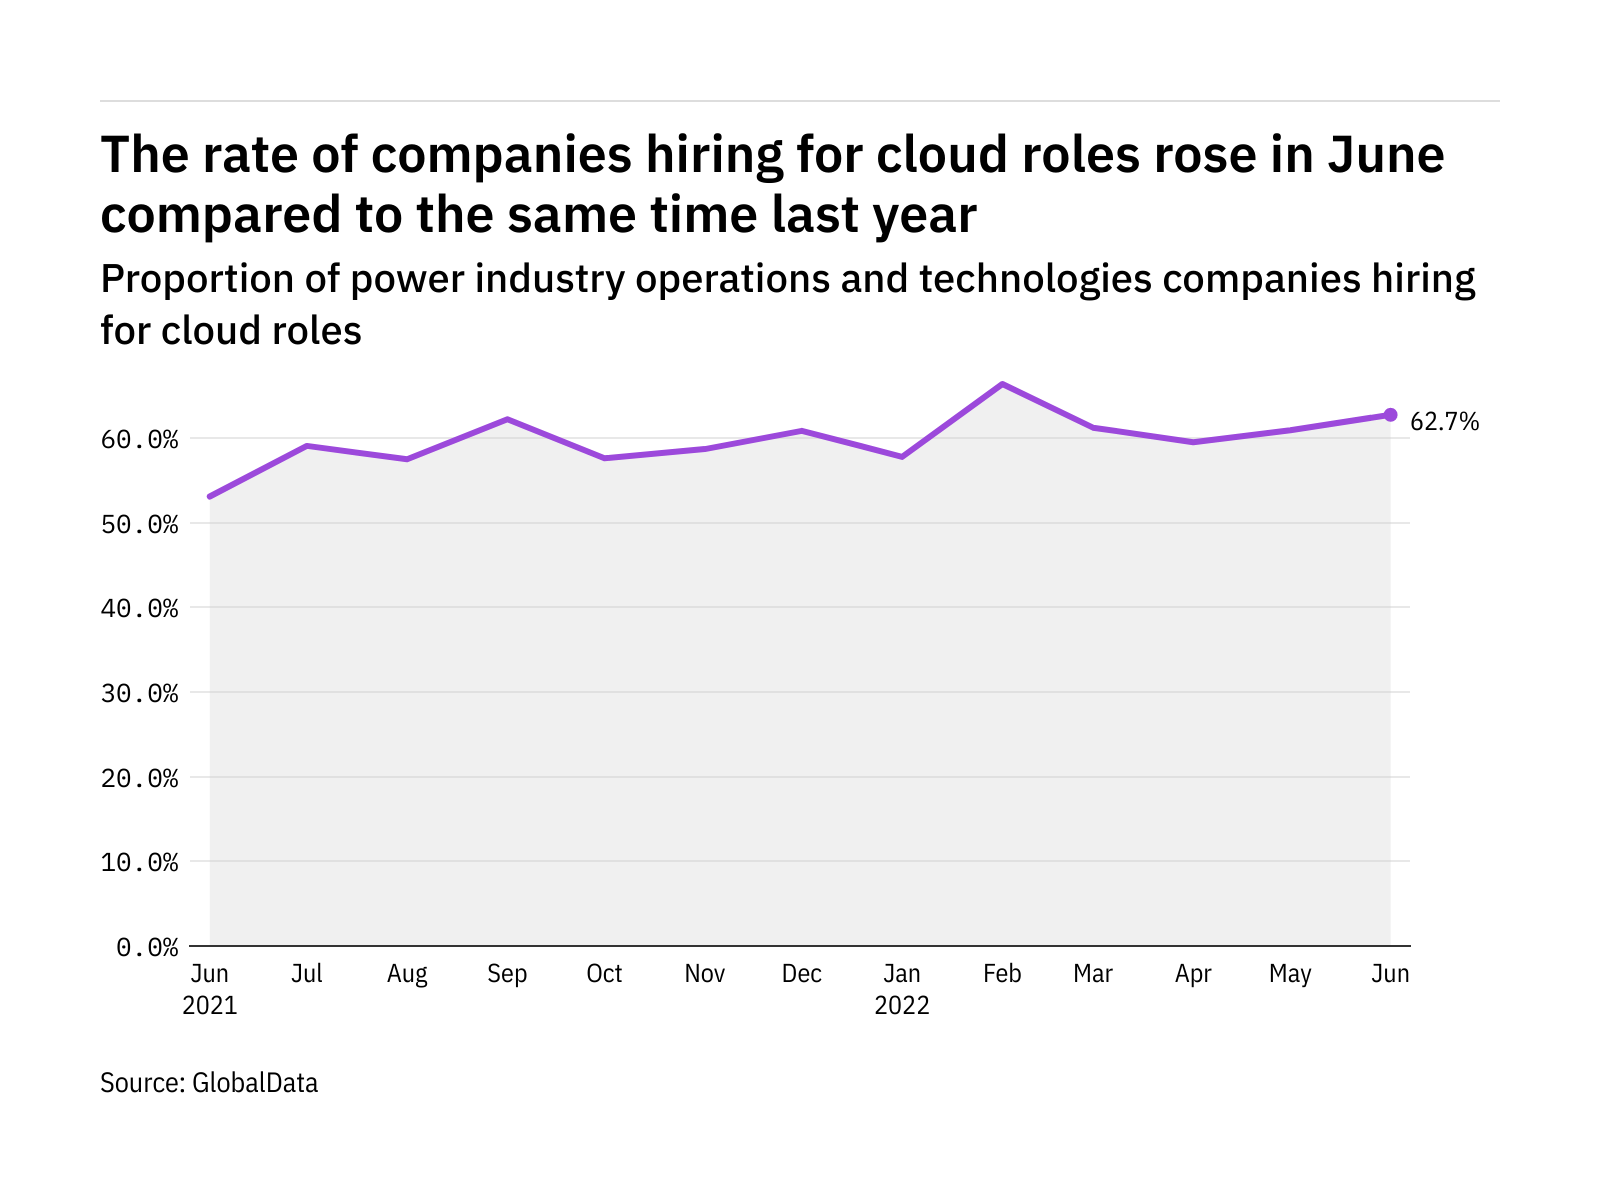 Cloud hiring levels in the power industry rose in June 2022